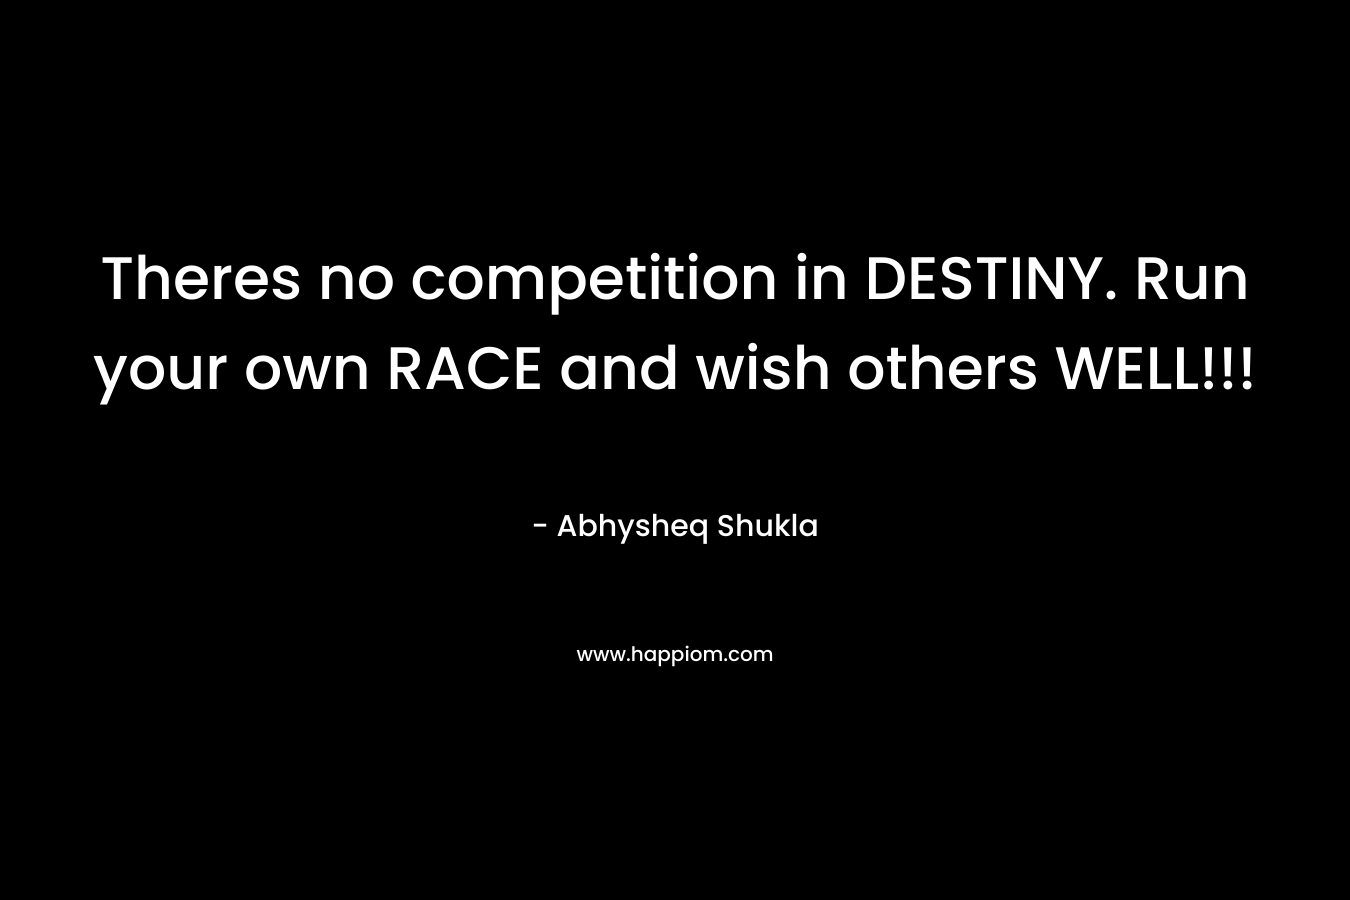 Theres no competition in DESTINY. Run your own RACE and wish others WELL!!!